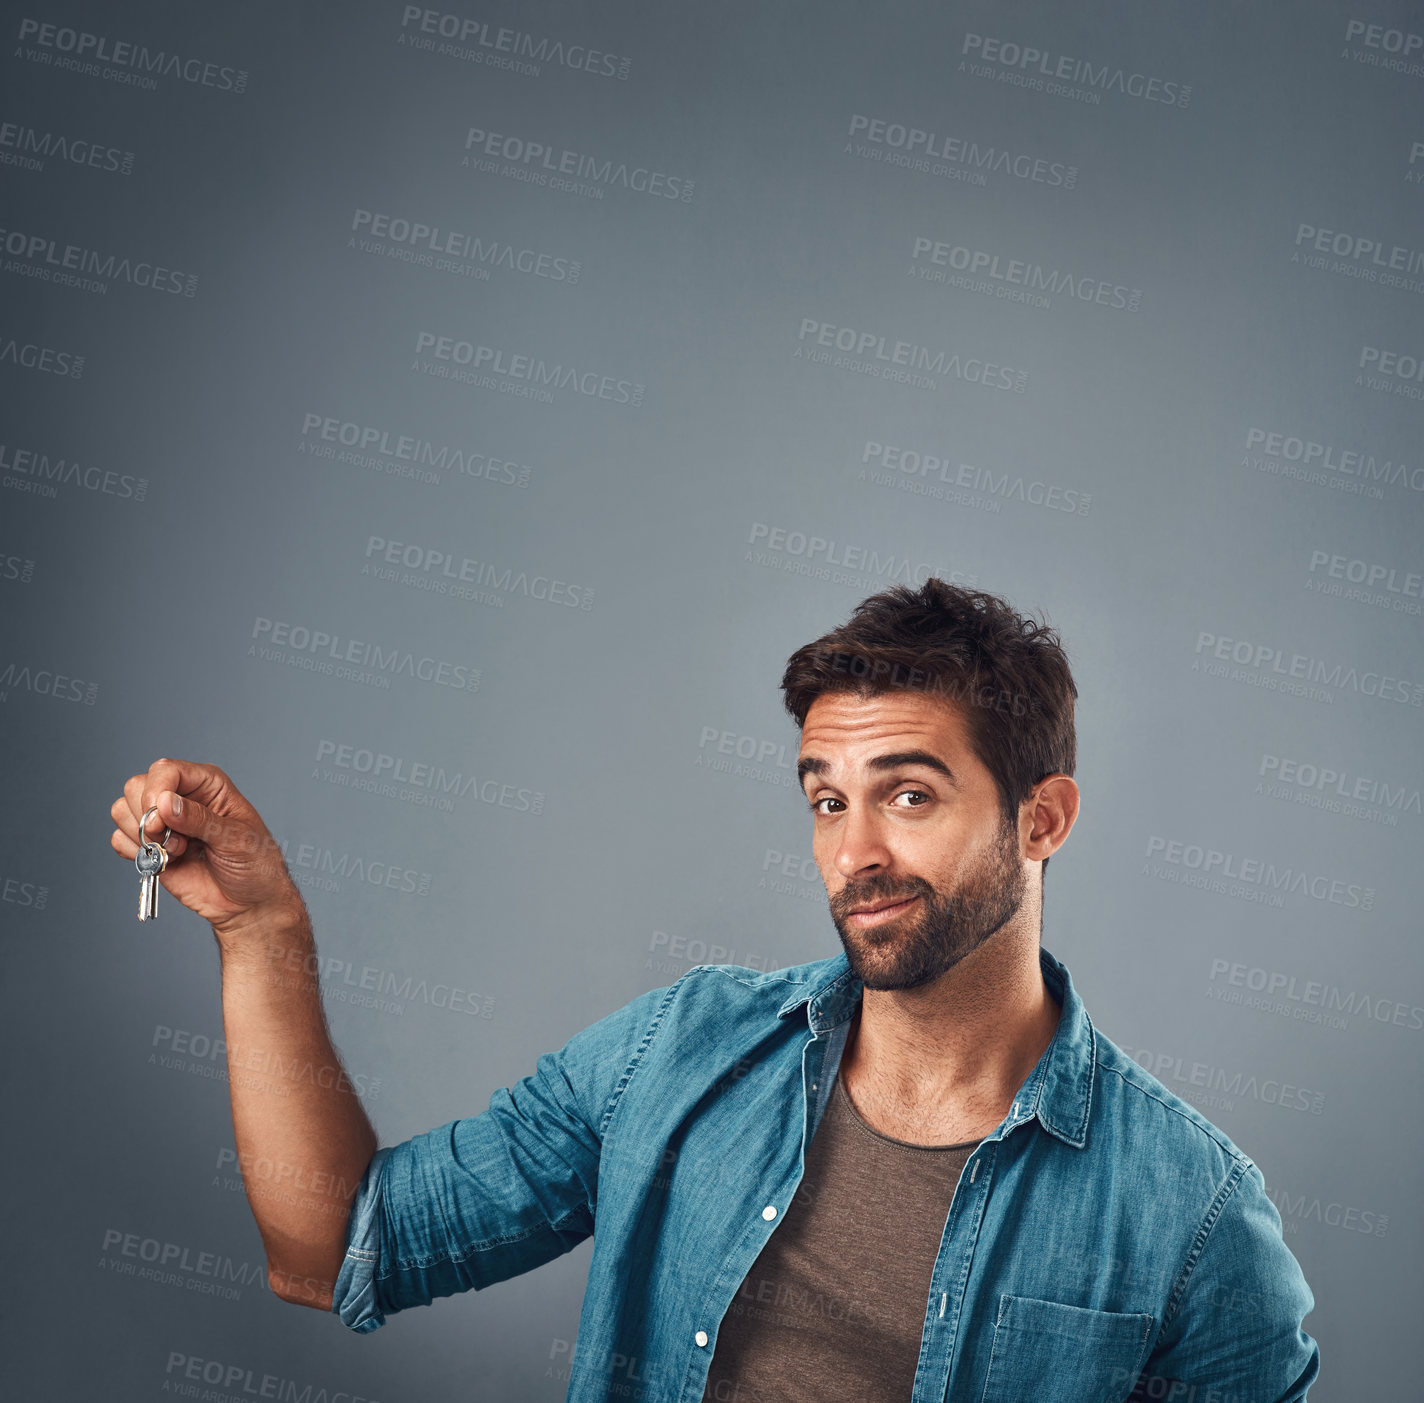 Buy stock photo Studio shot of a handsome young man holding a set of keys against a grey background